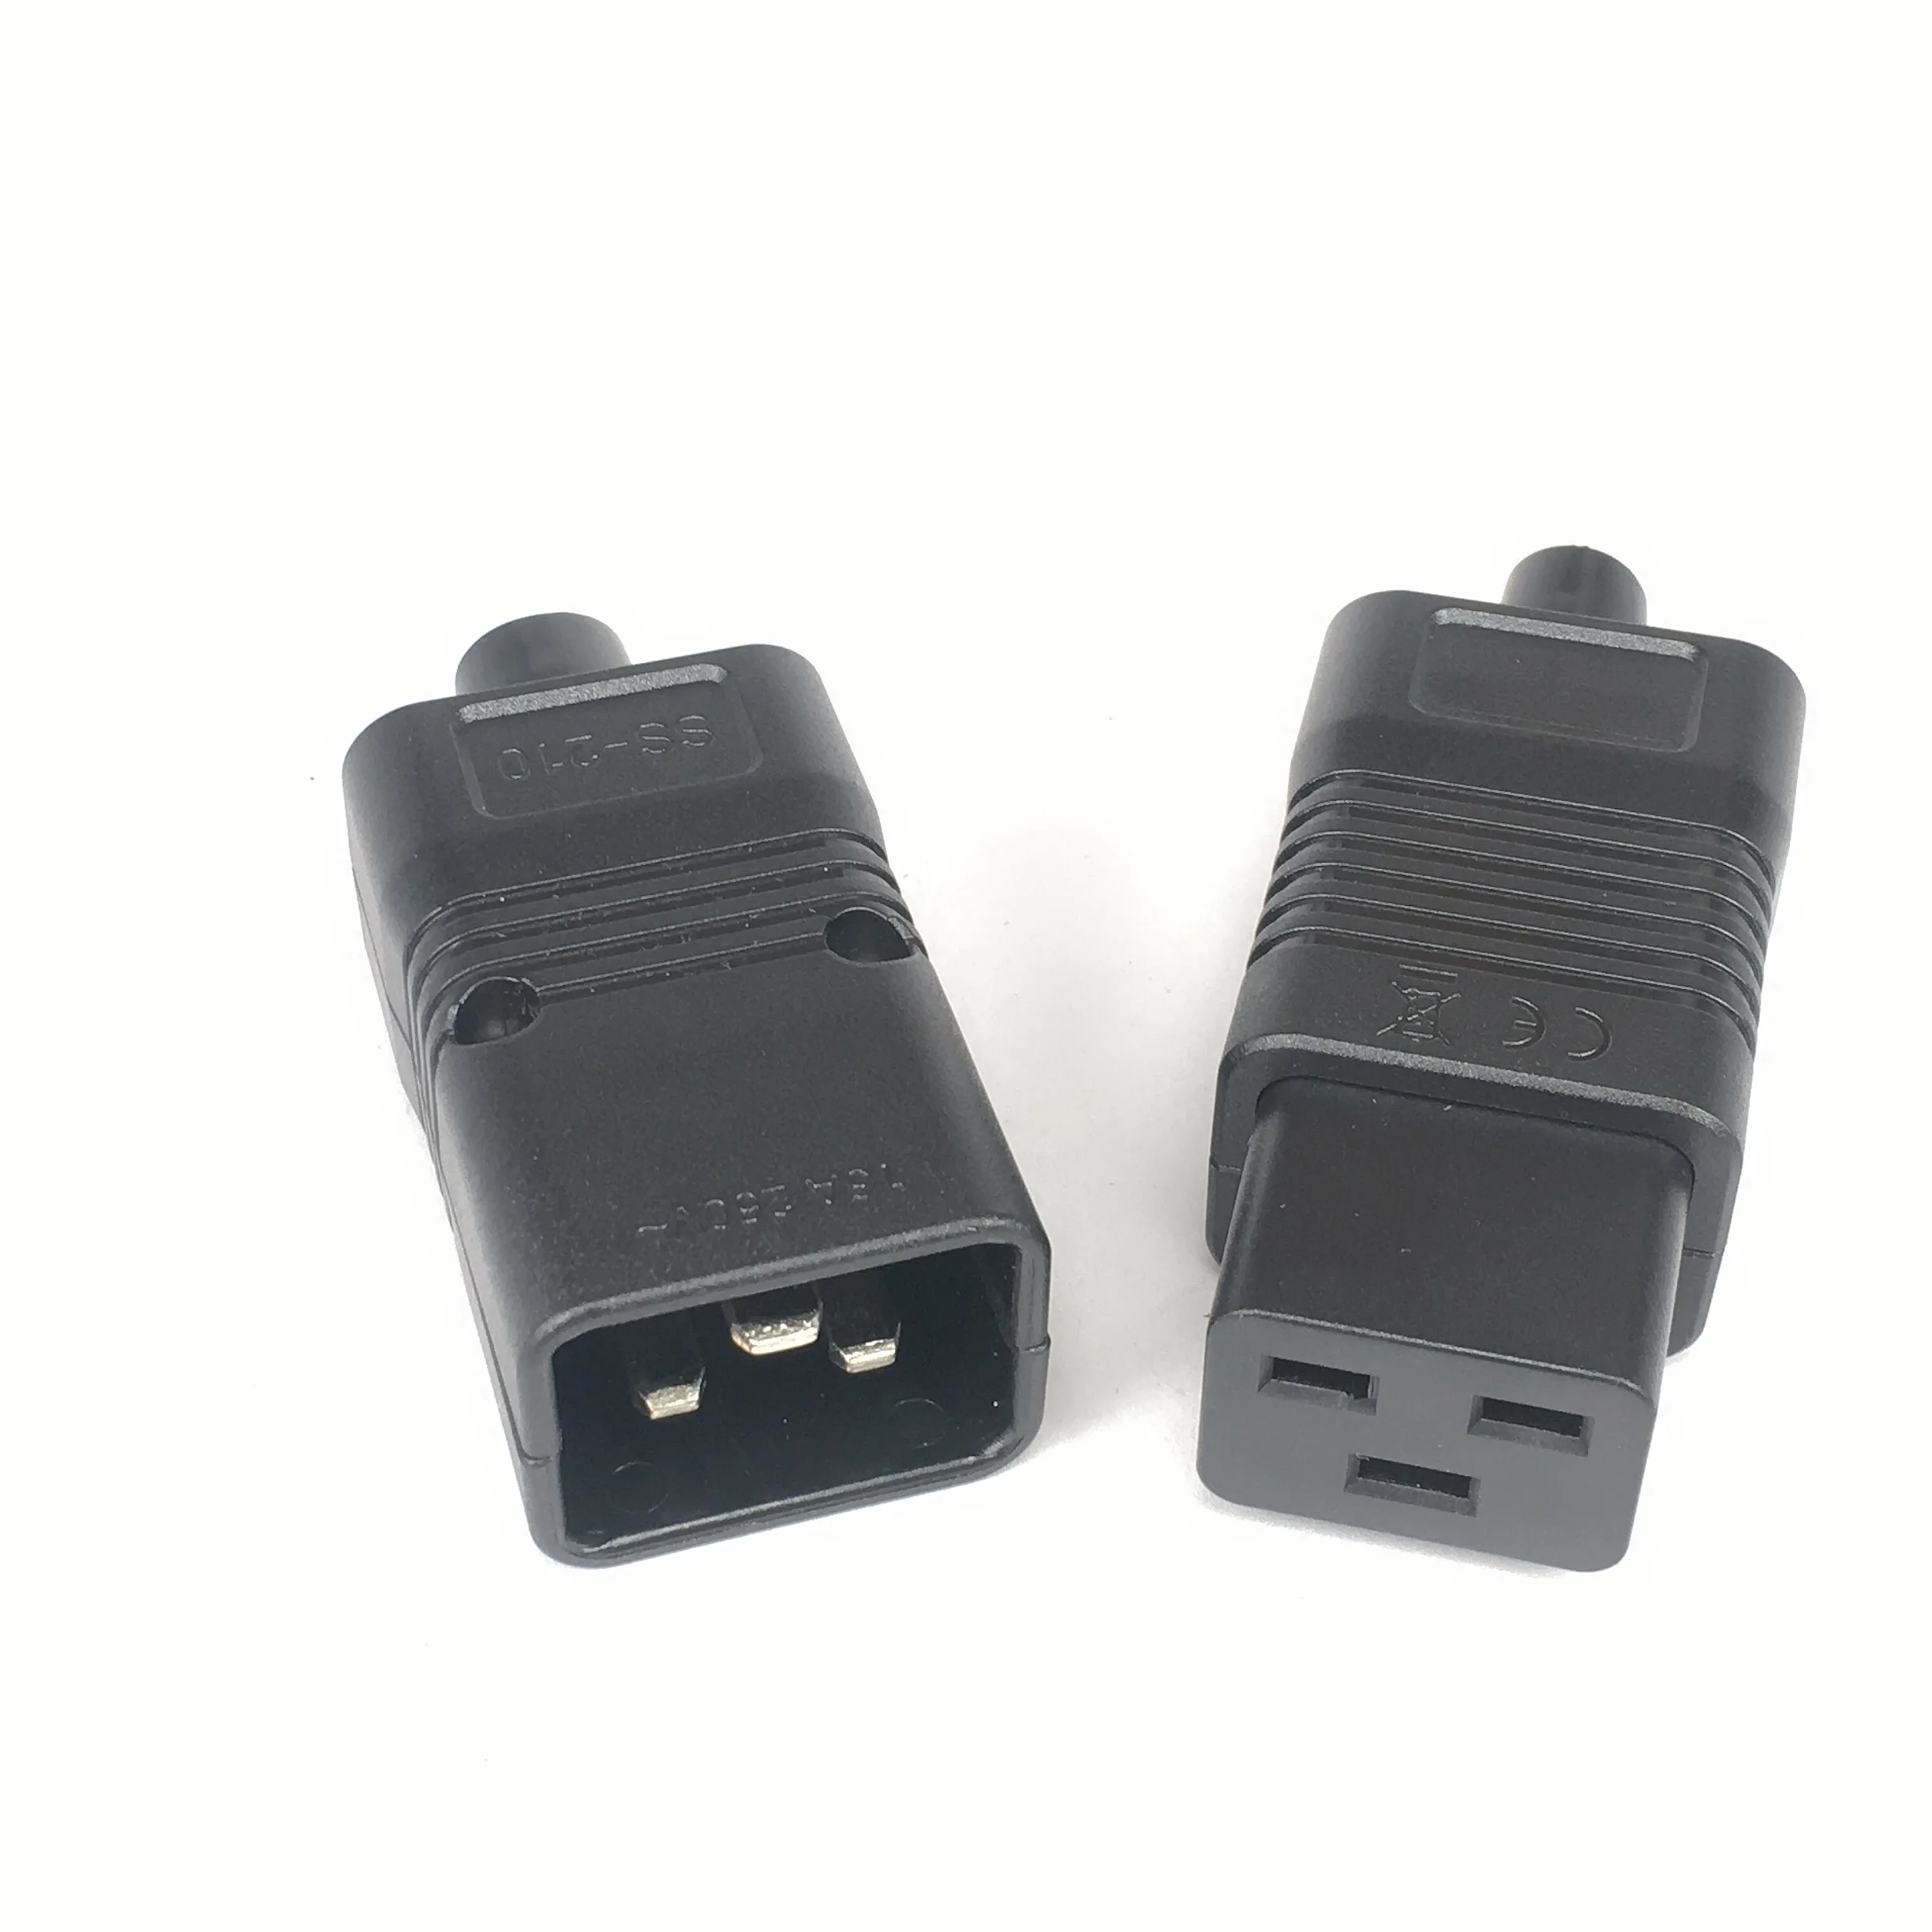 PDU/UPS Socket Standard IEC320 C19 C20 16A 250V AC Electrical Power Cable Cord Connector Removable plug Female Male Plug Adapter